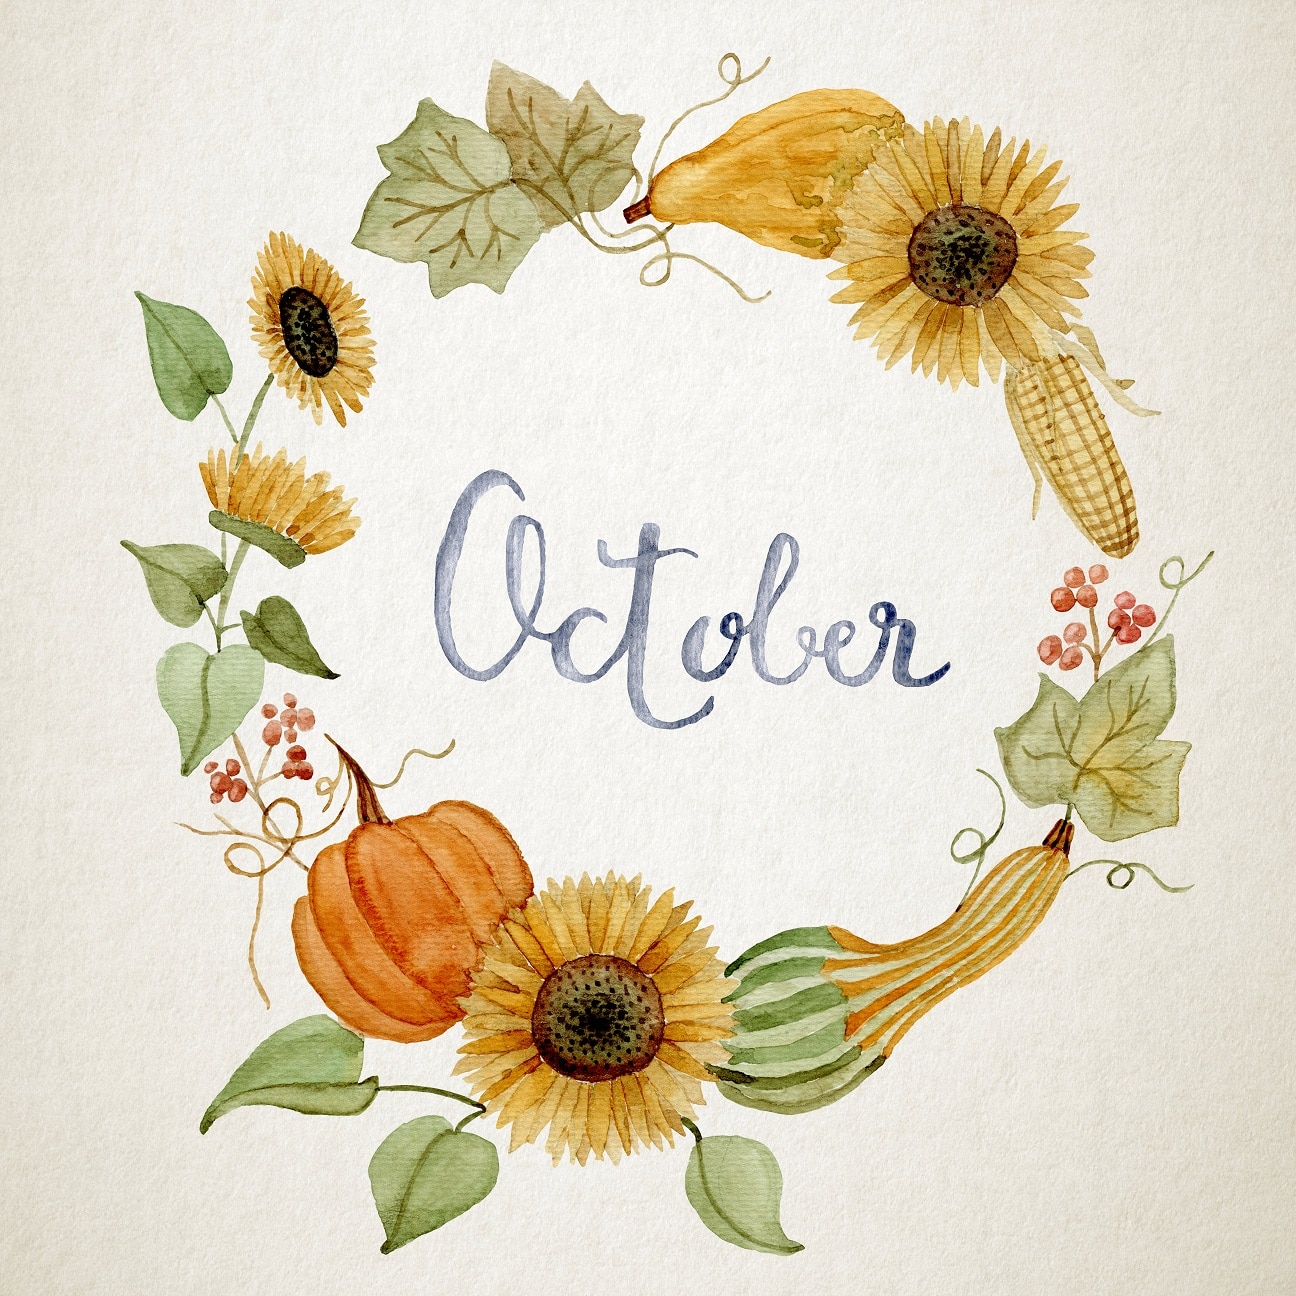 Watercolor floral wreath collection